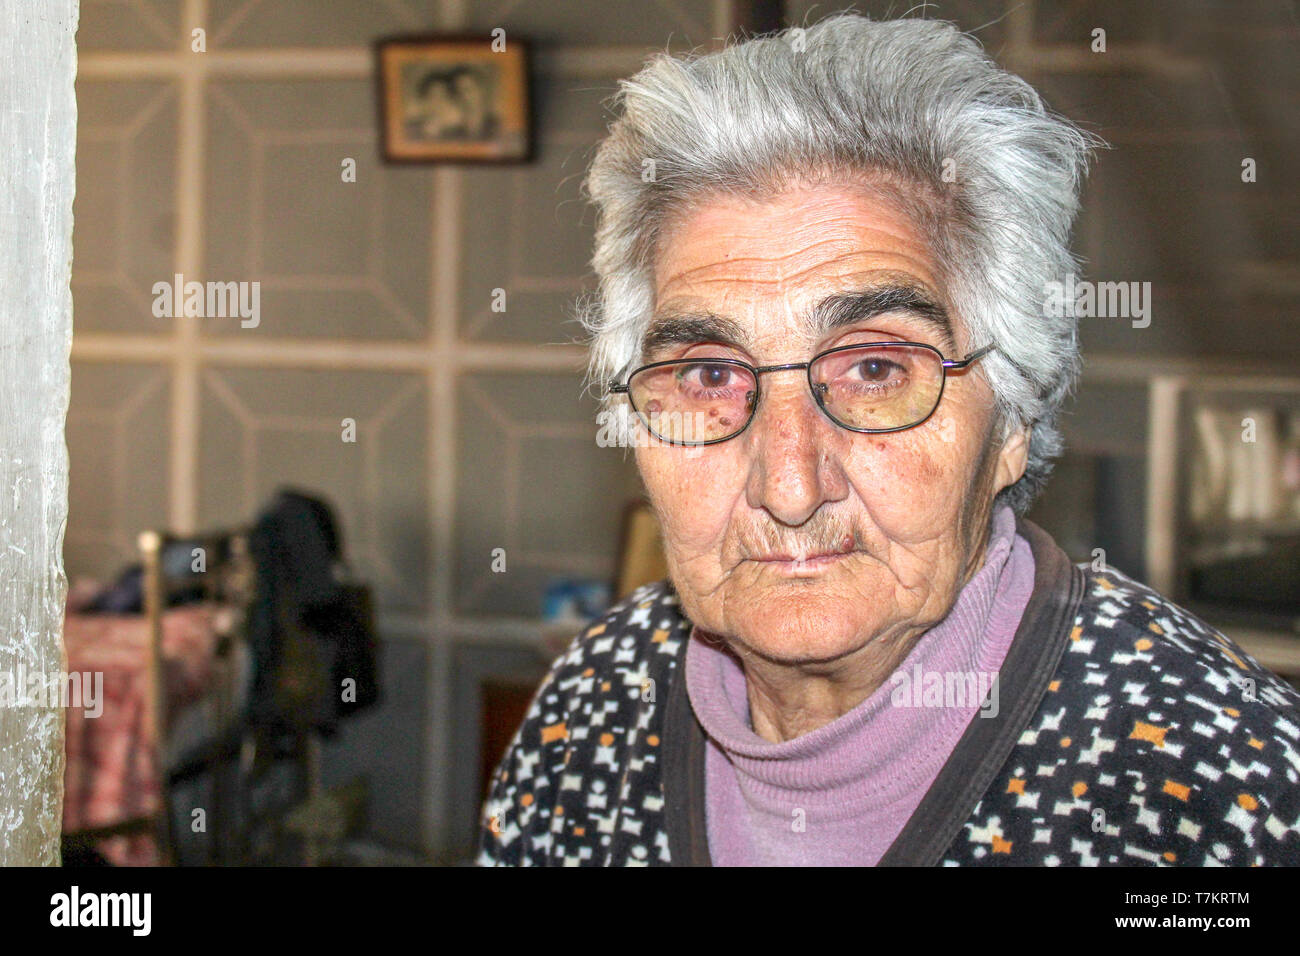 An elderly woman with glasses looks into the lens of the photographer behind her photo on the wall Stock Photo